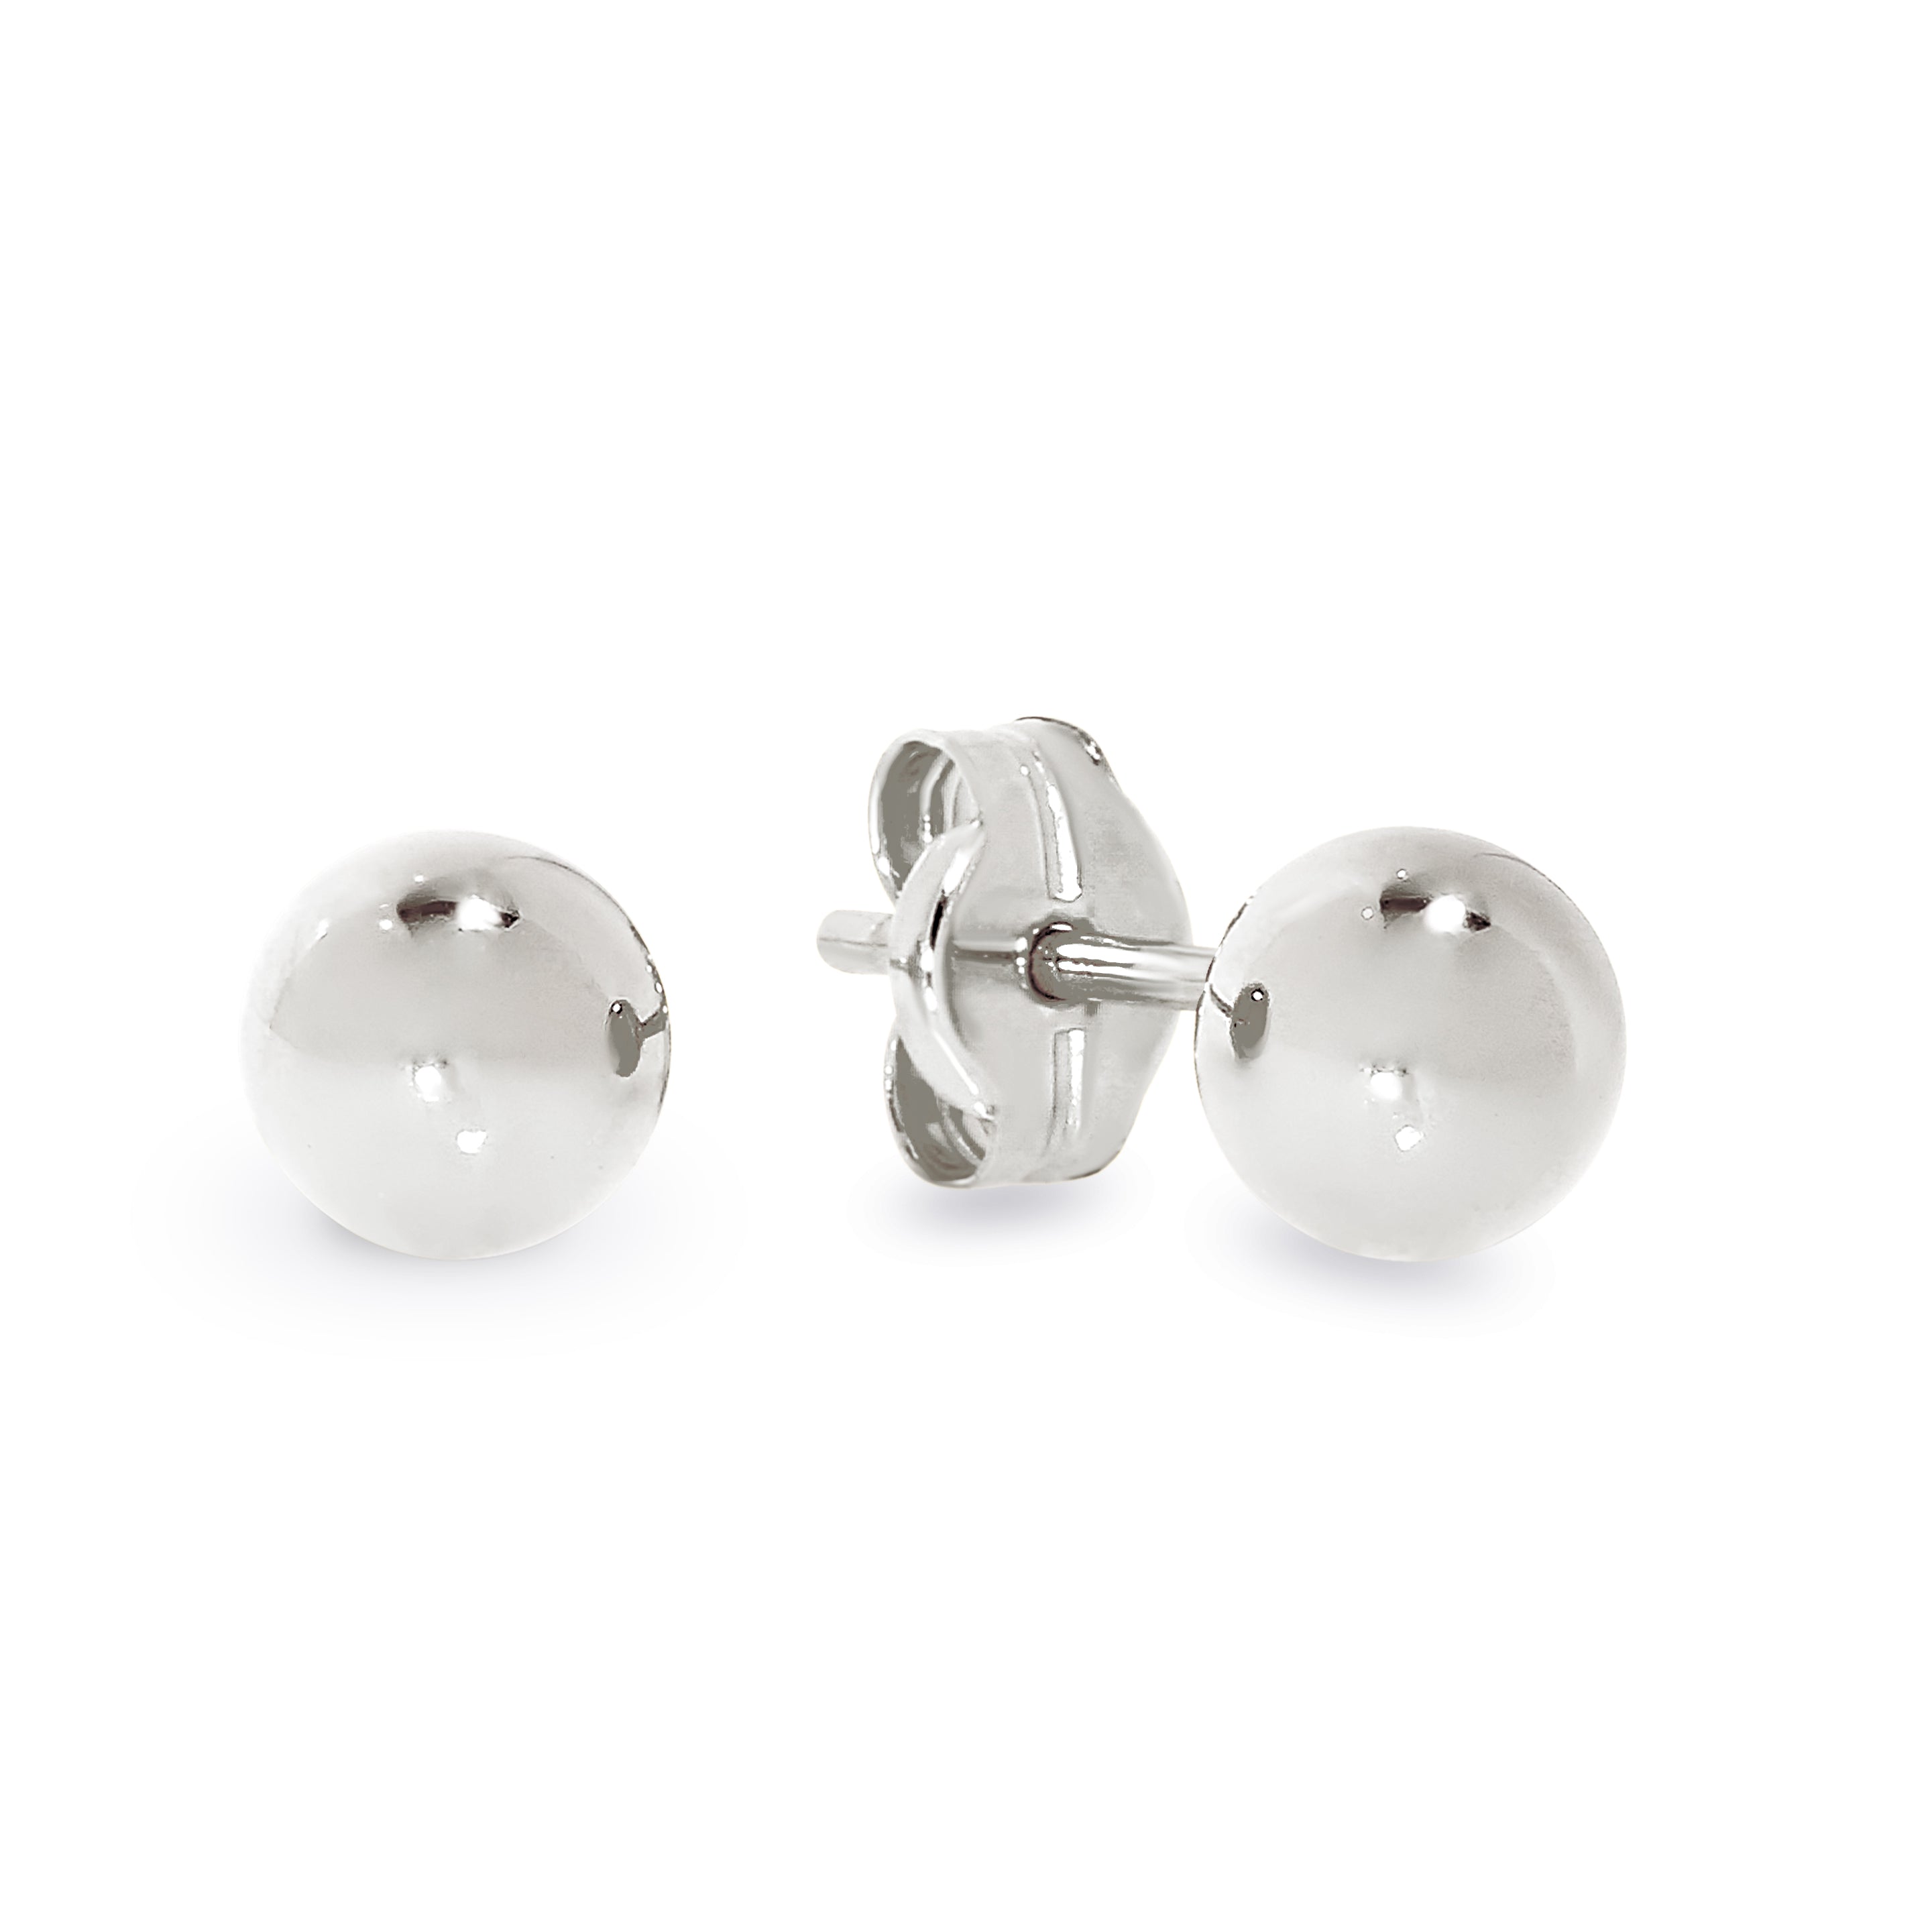 Silver polished 4mm ball studs